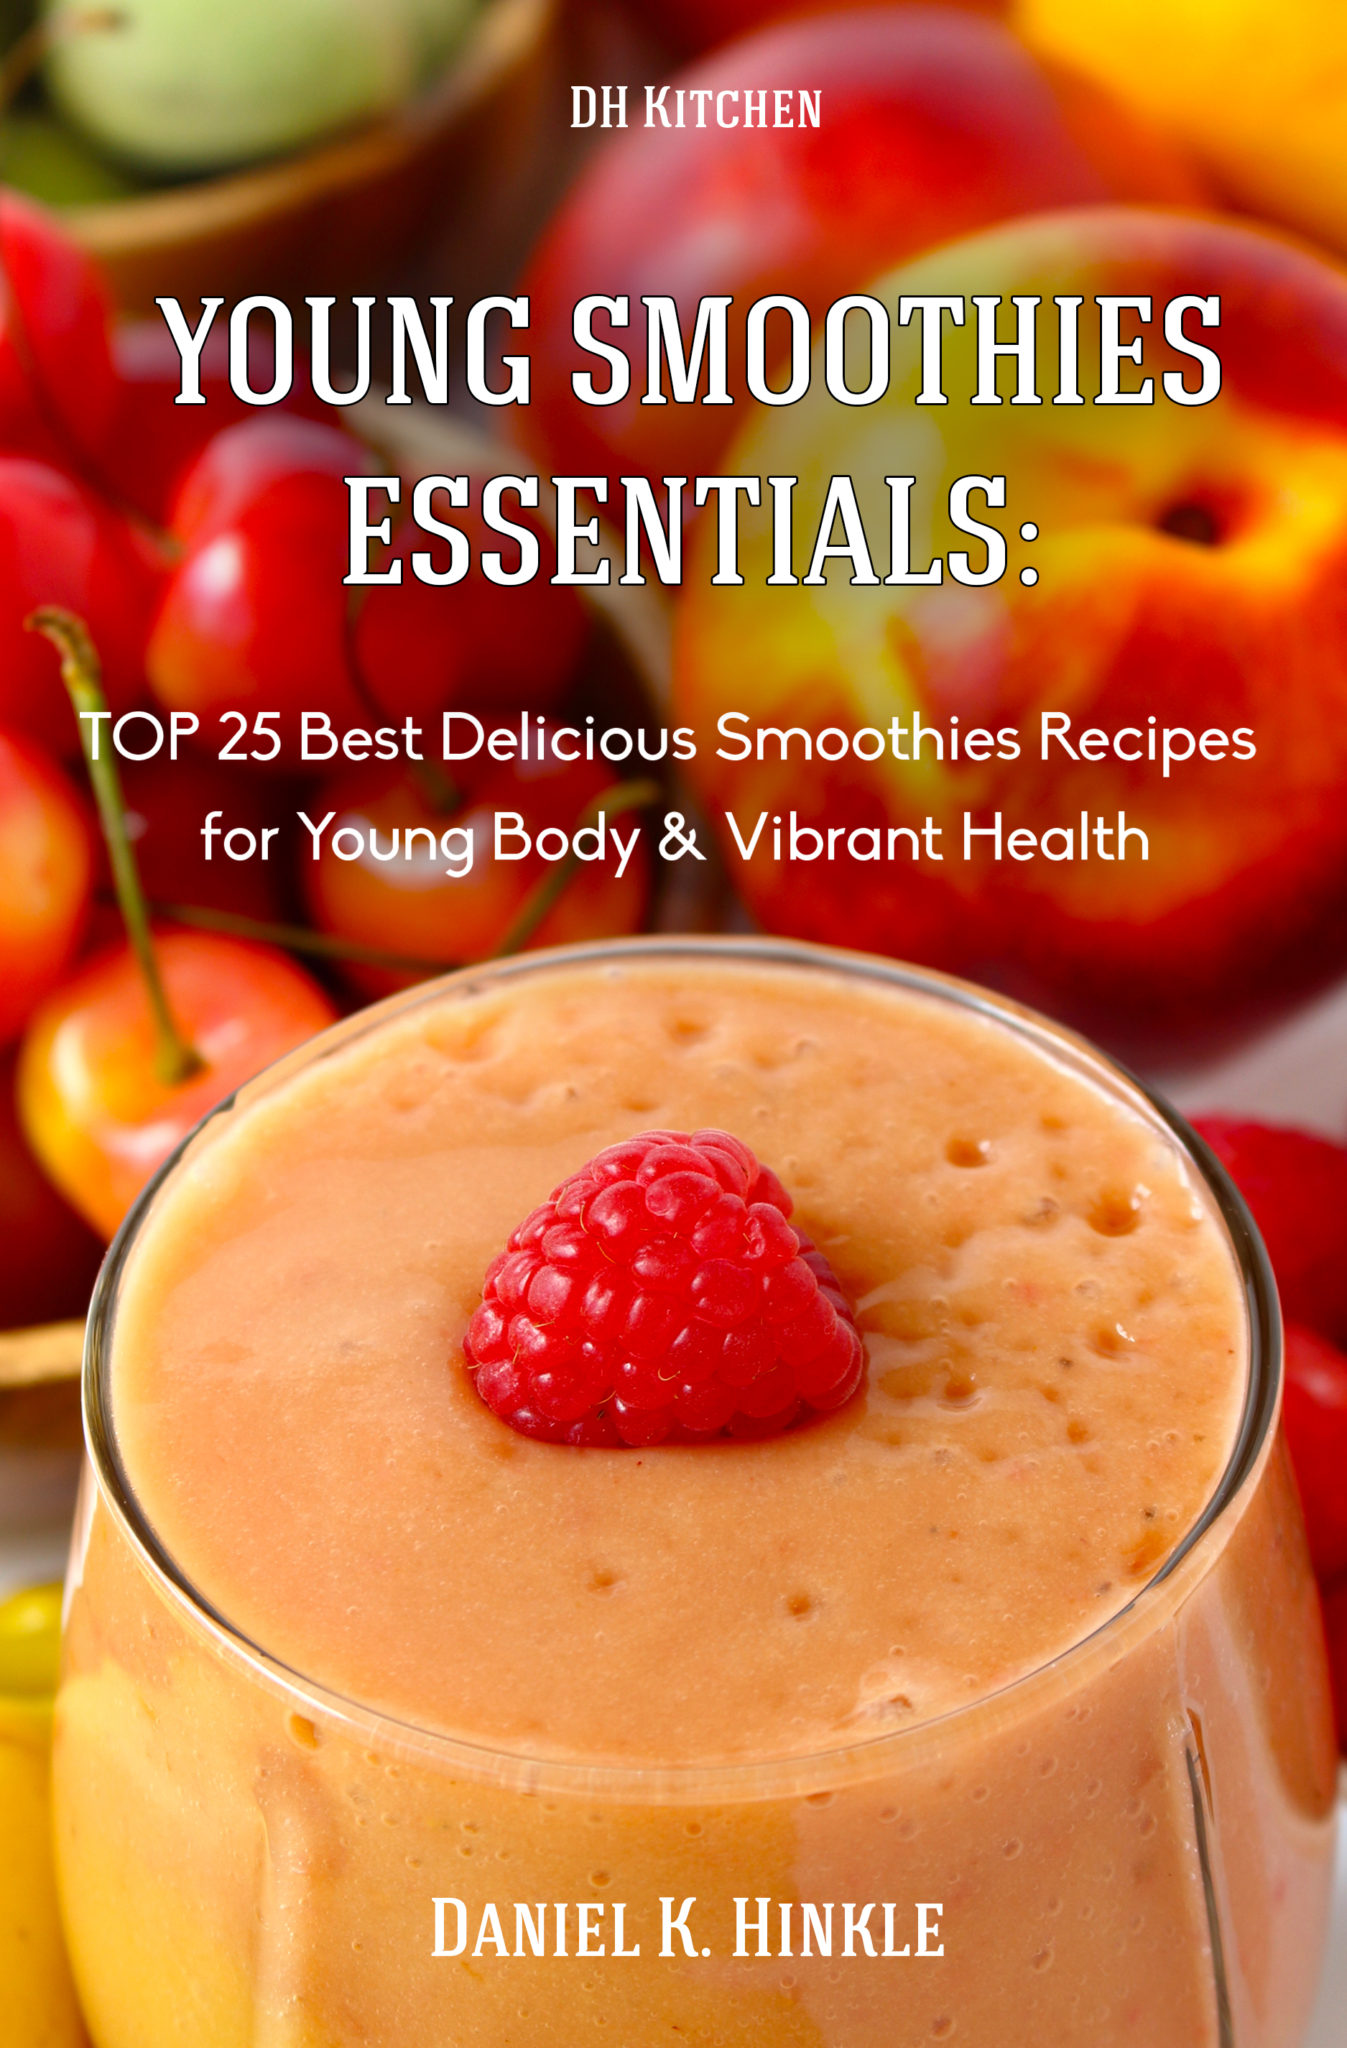 FREE: Young Smoothies Essentials: TOP 25 Best Delicious Smoothies Recipes for Young Body & Vibrant Health (DH Kitchen Book 31) by Daniel Hinkle